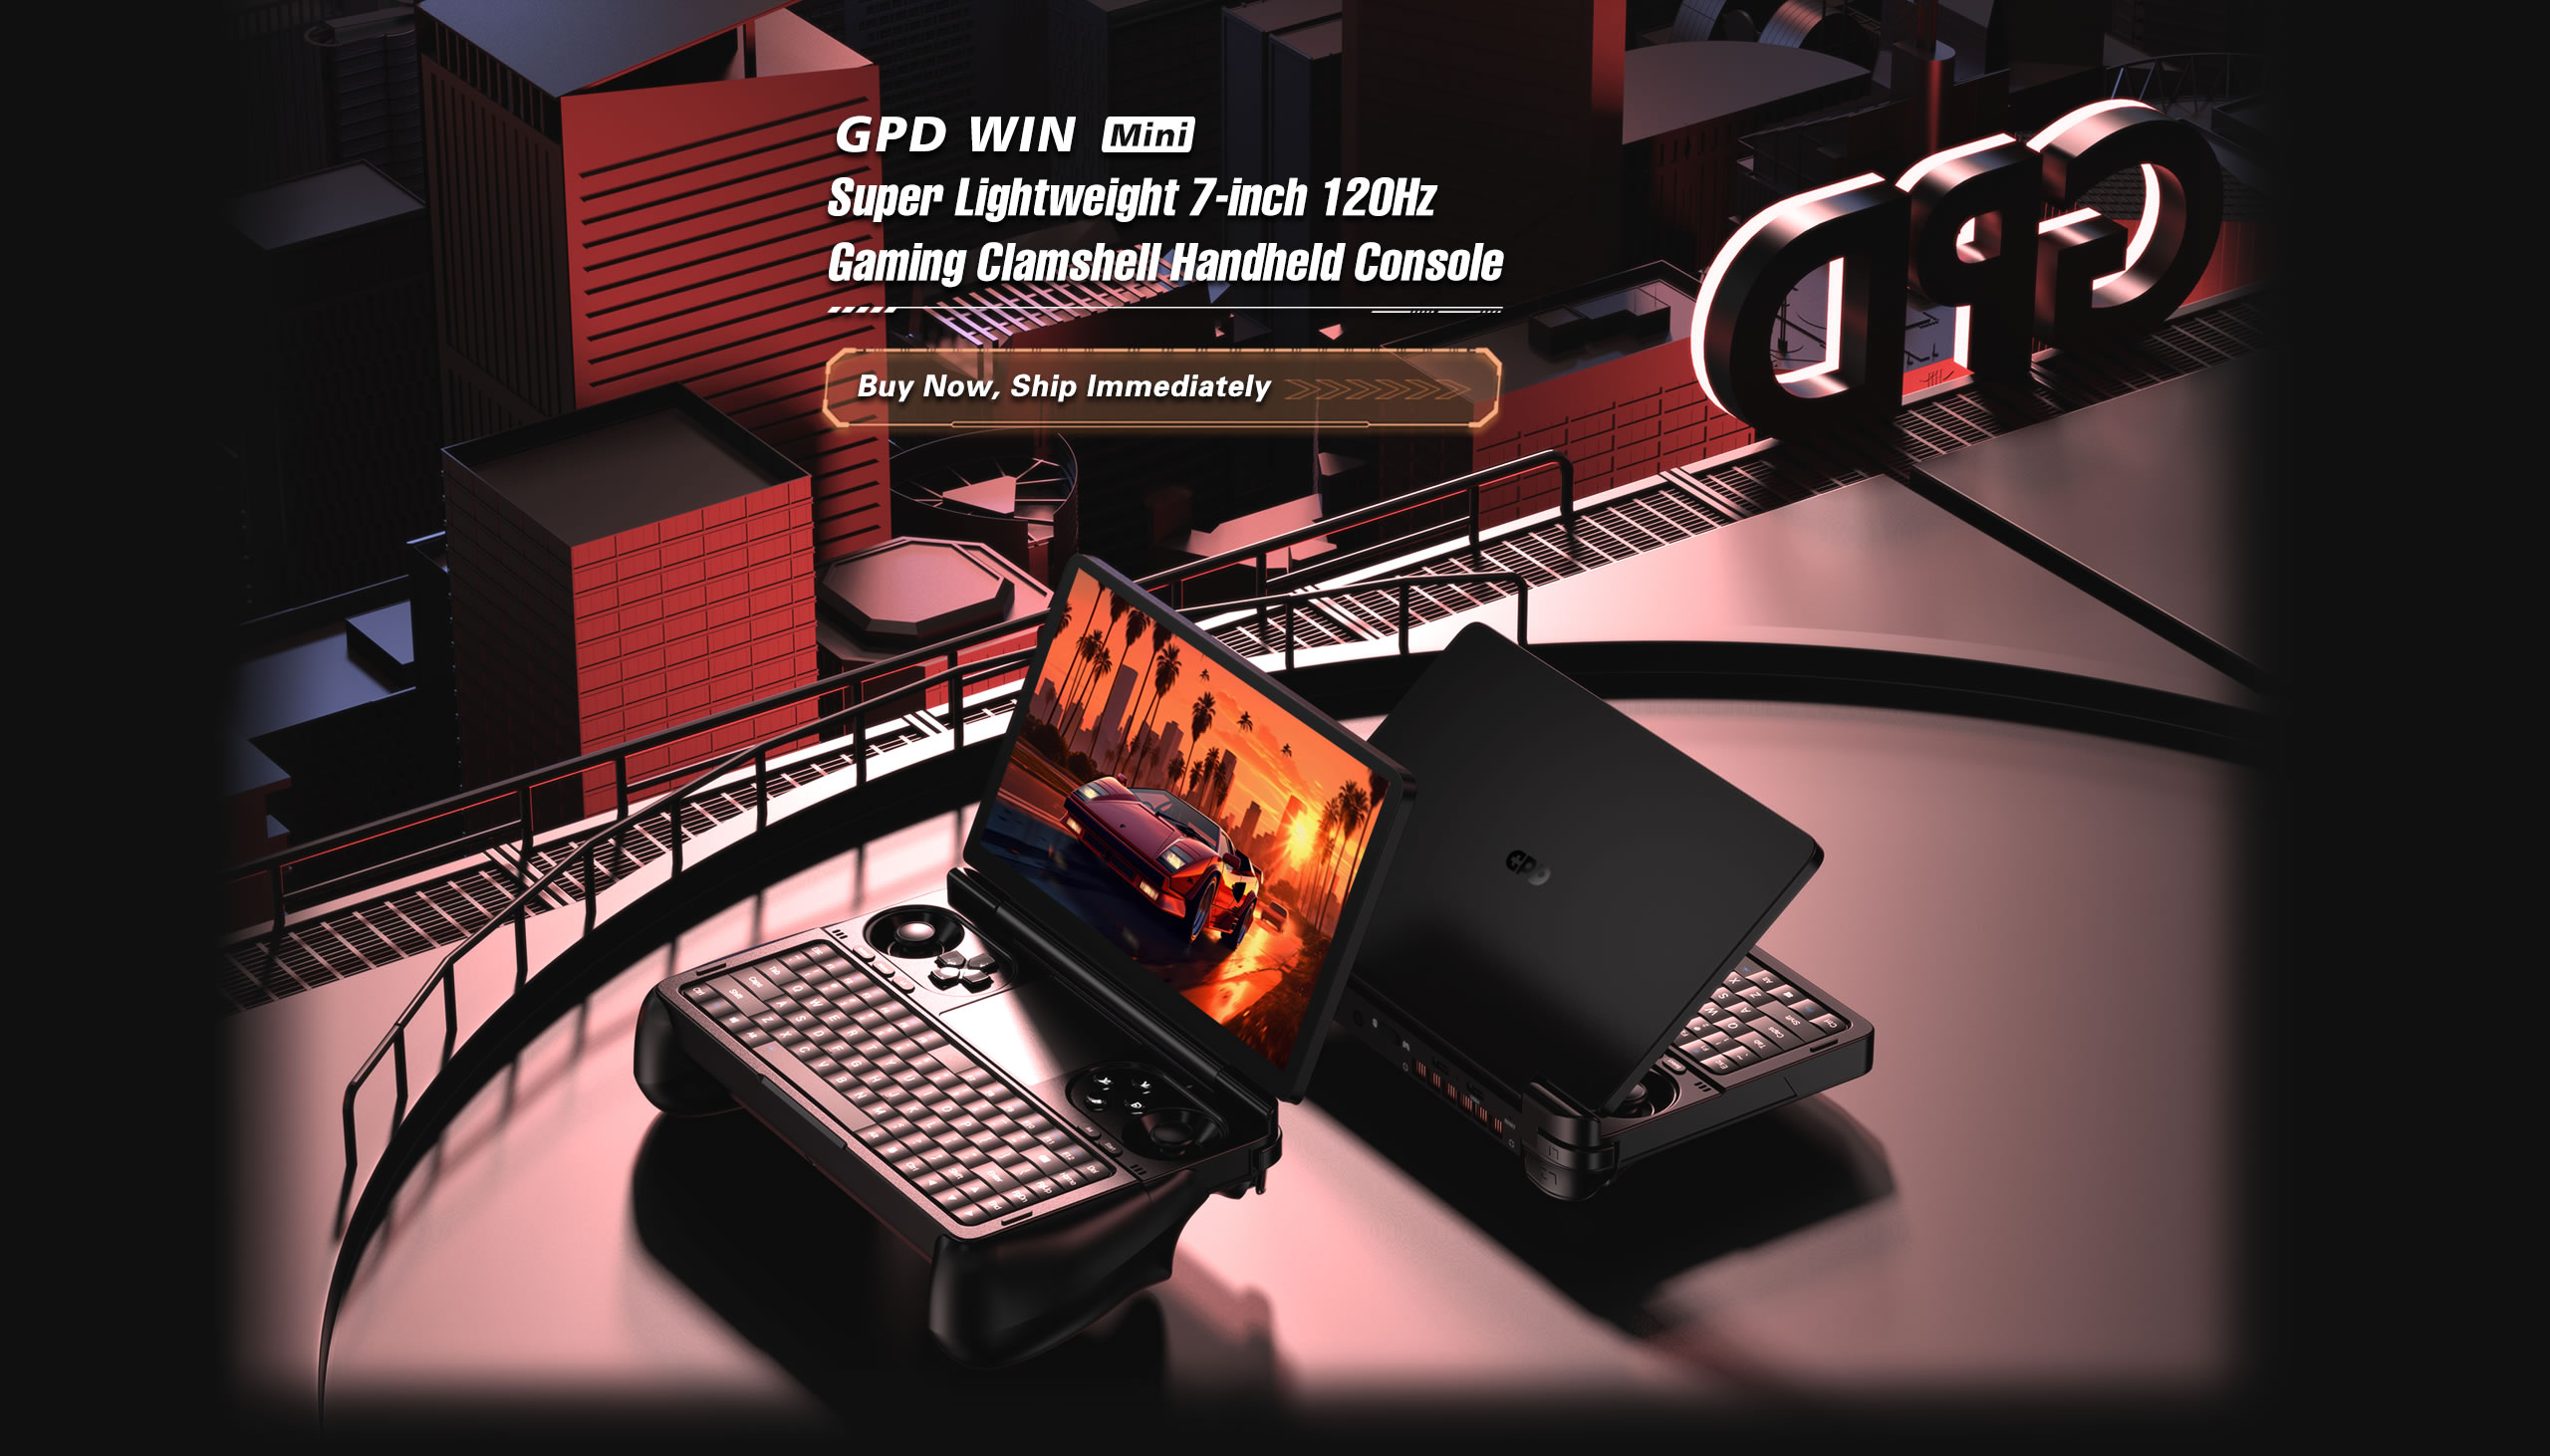 GPD Micro PC industry Mini Laptop with RS232 | DroiX Global